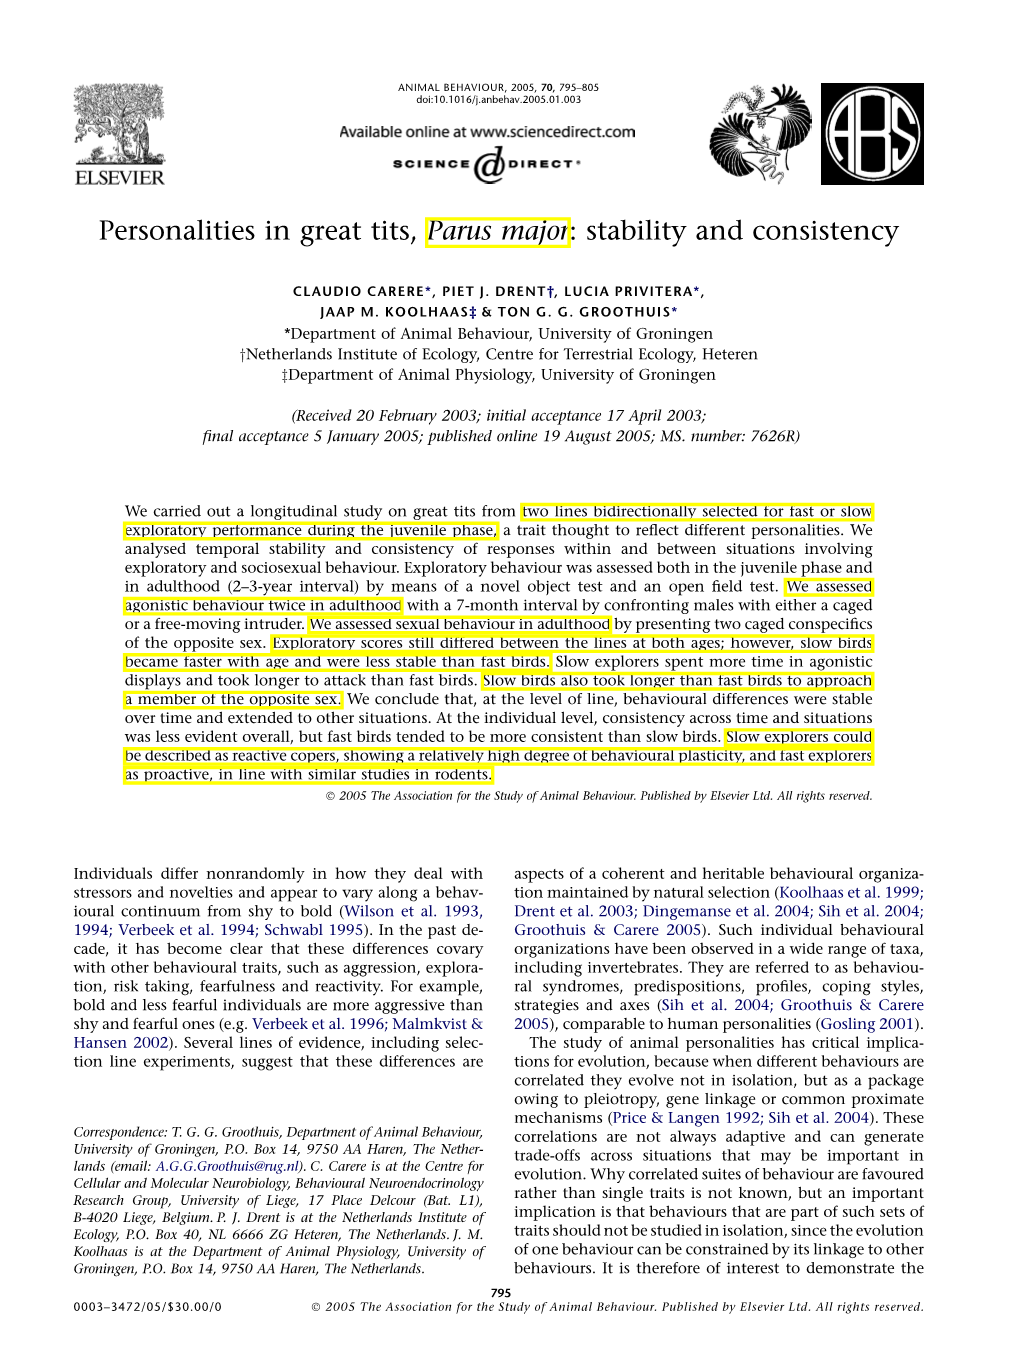 Personalities in Great Tits, Parus Major: Stability and Consistency